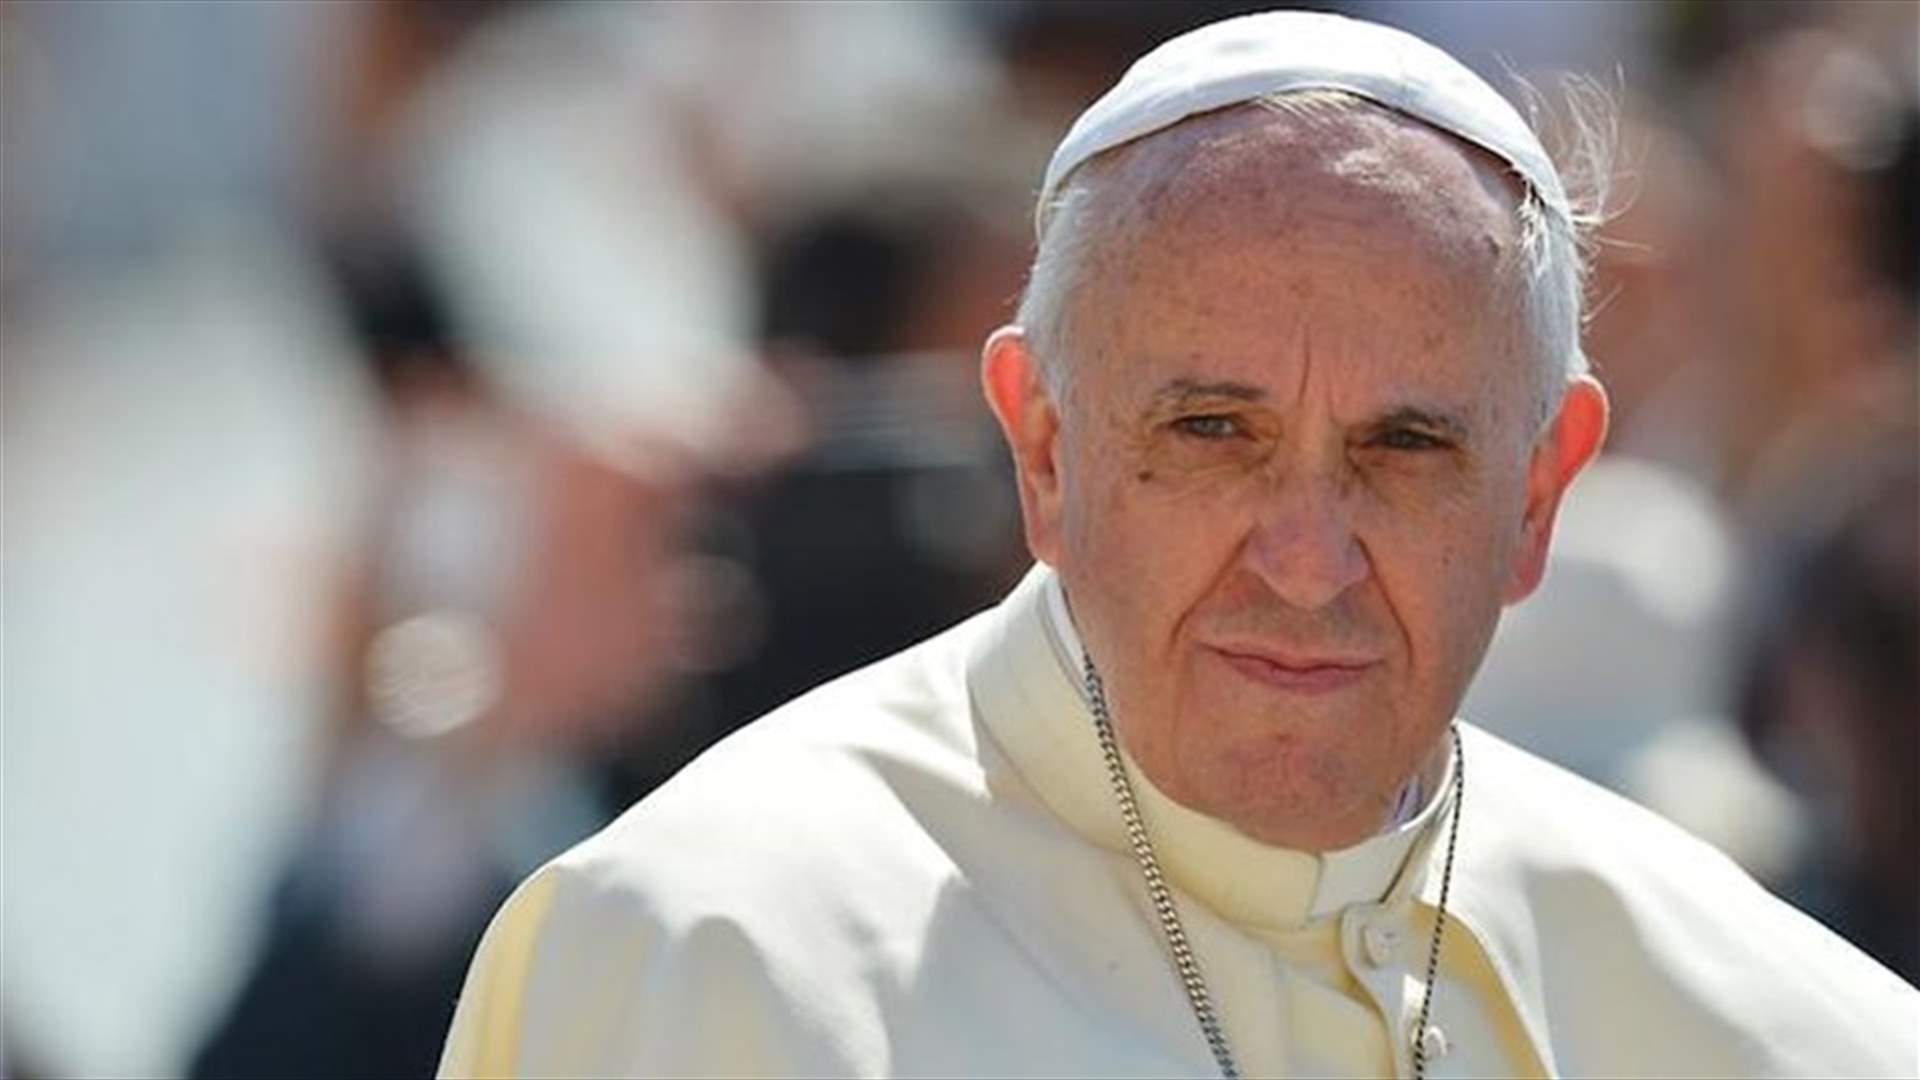 Pope to visit Armenia after irking Turkey with &quot;genocide&quot; label